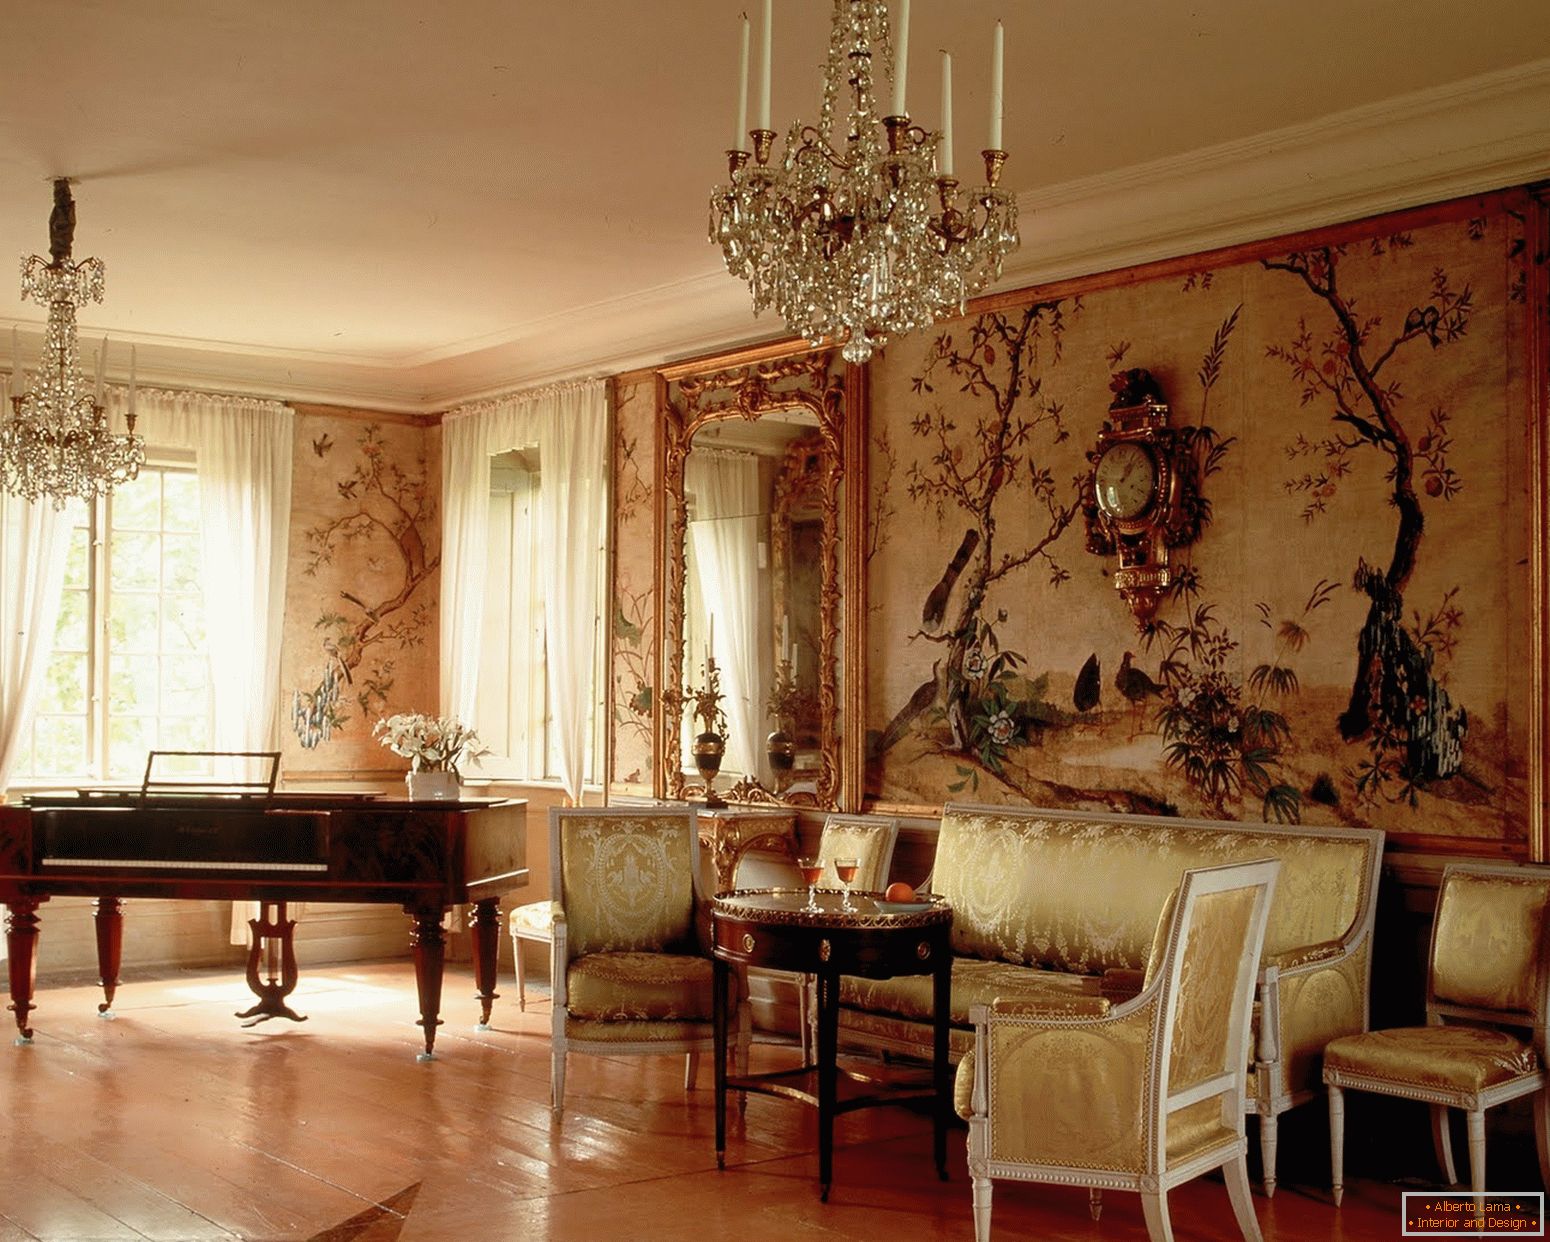 Grand piano in the living room